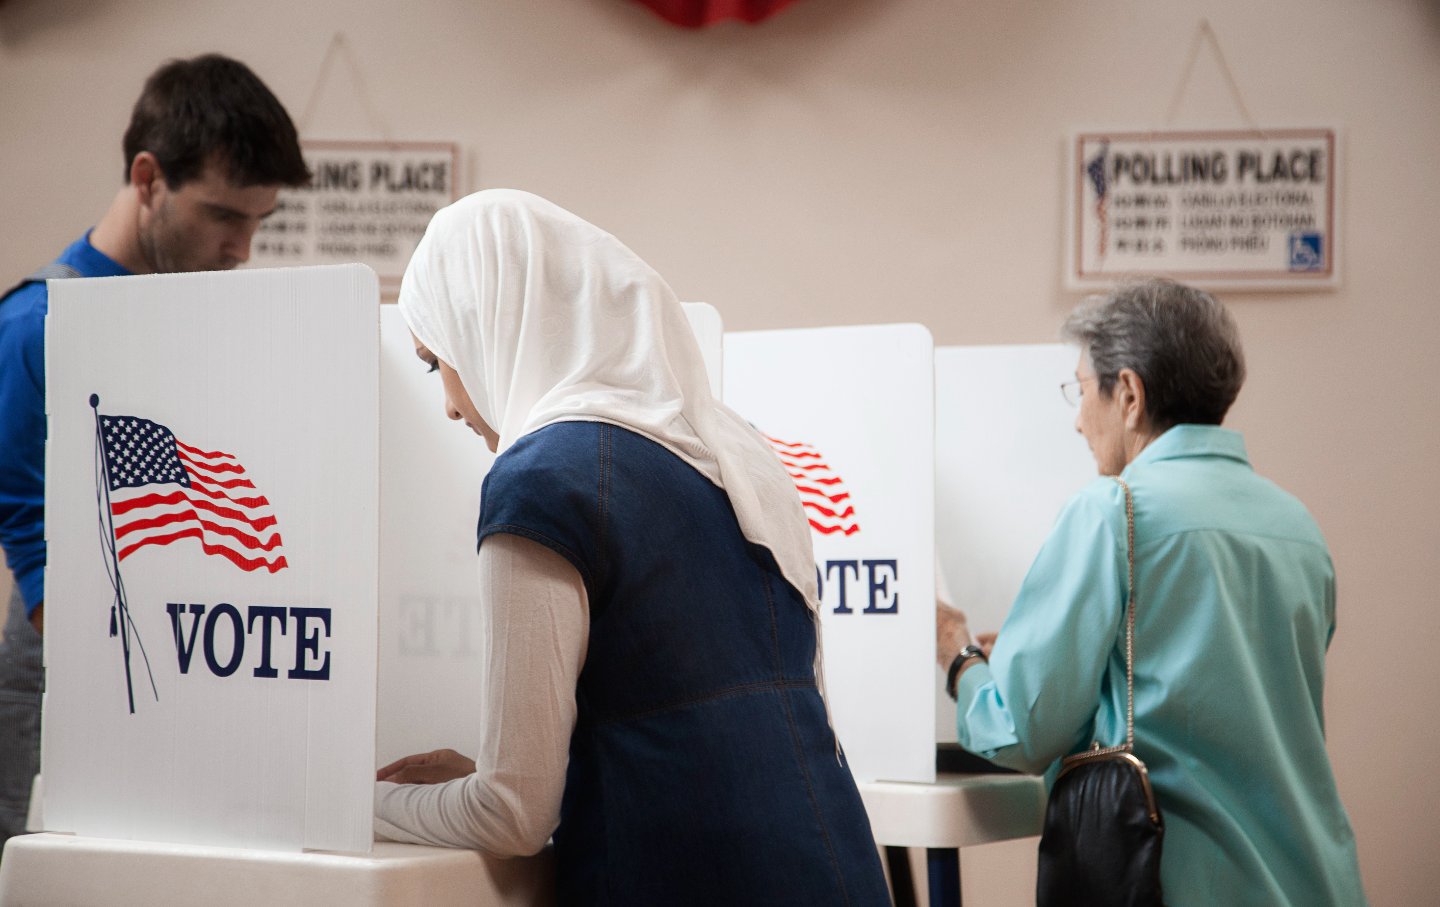 An Arab American voter at a poll site.